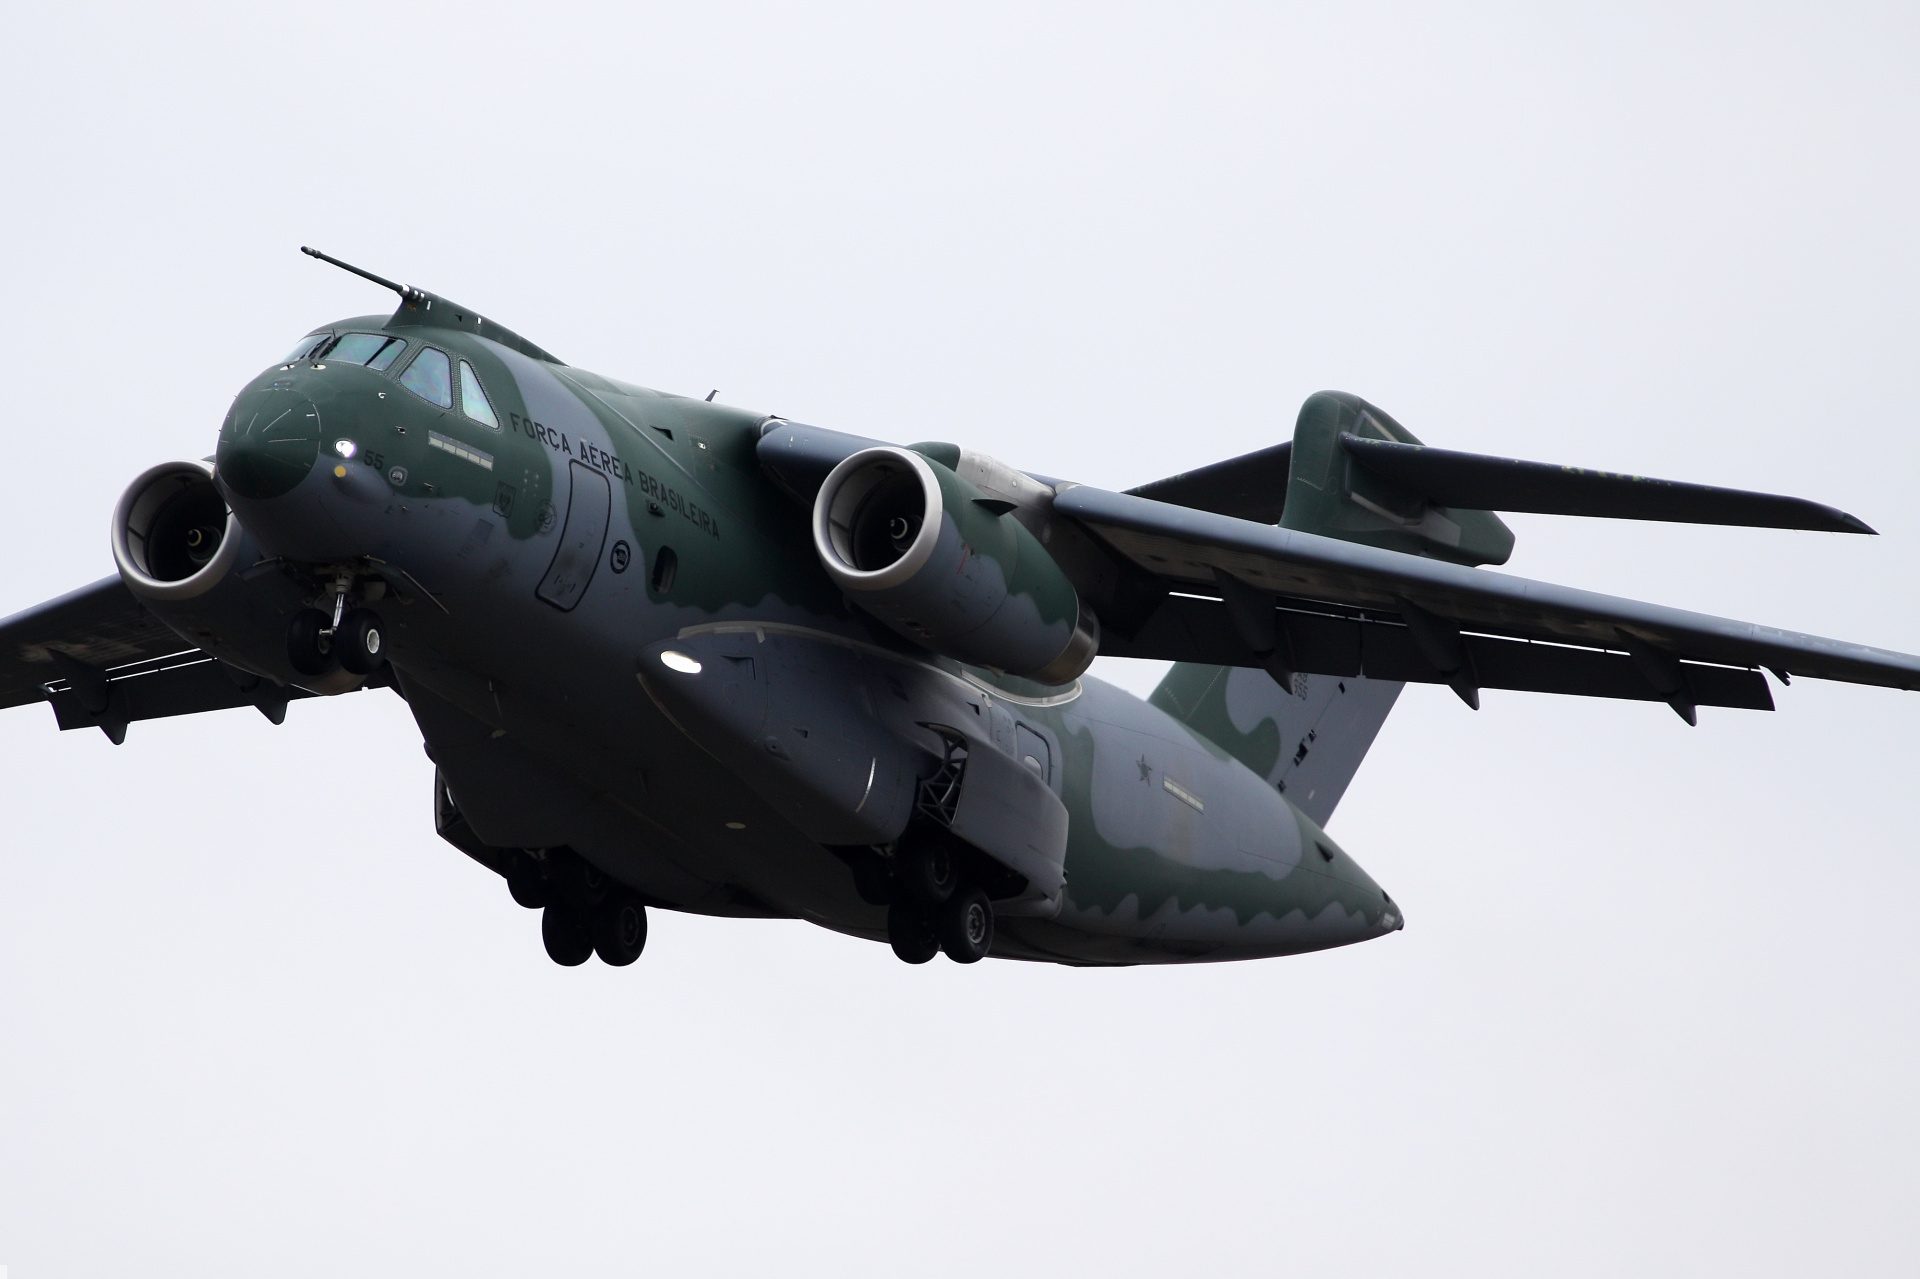 KC-390, FAB2855, Brazilian Air Force (Aircraft » EPWA Spotting » Embraer C-390 Millenium and revisions)